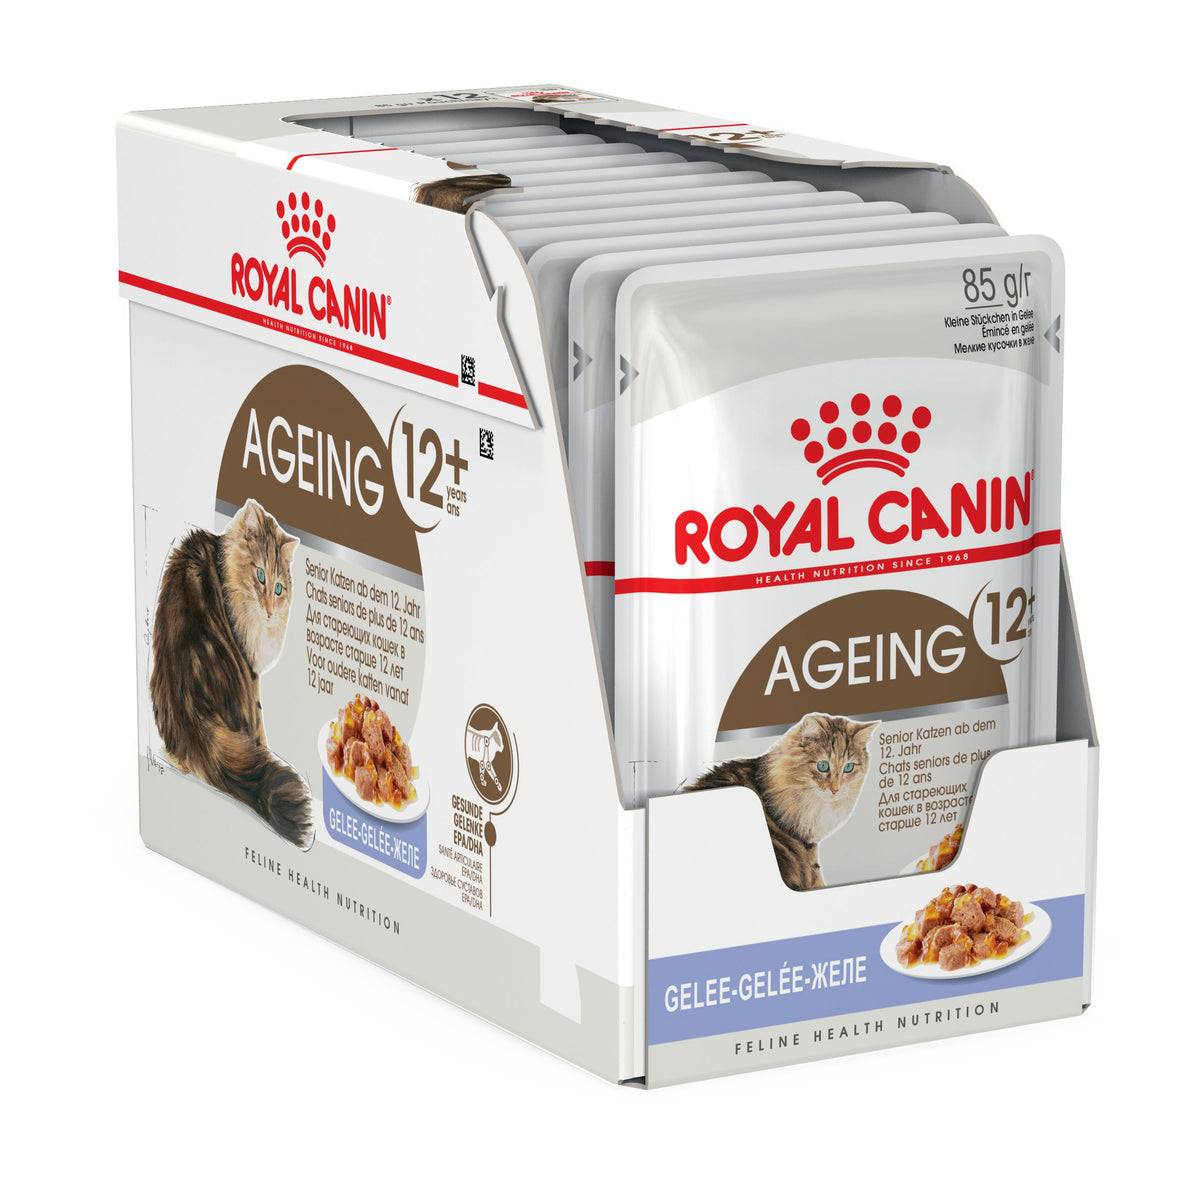 Royal Canin Ageing 12+ Jelly Box 12 x 85g